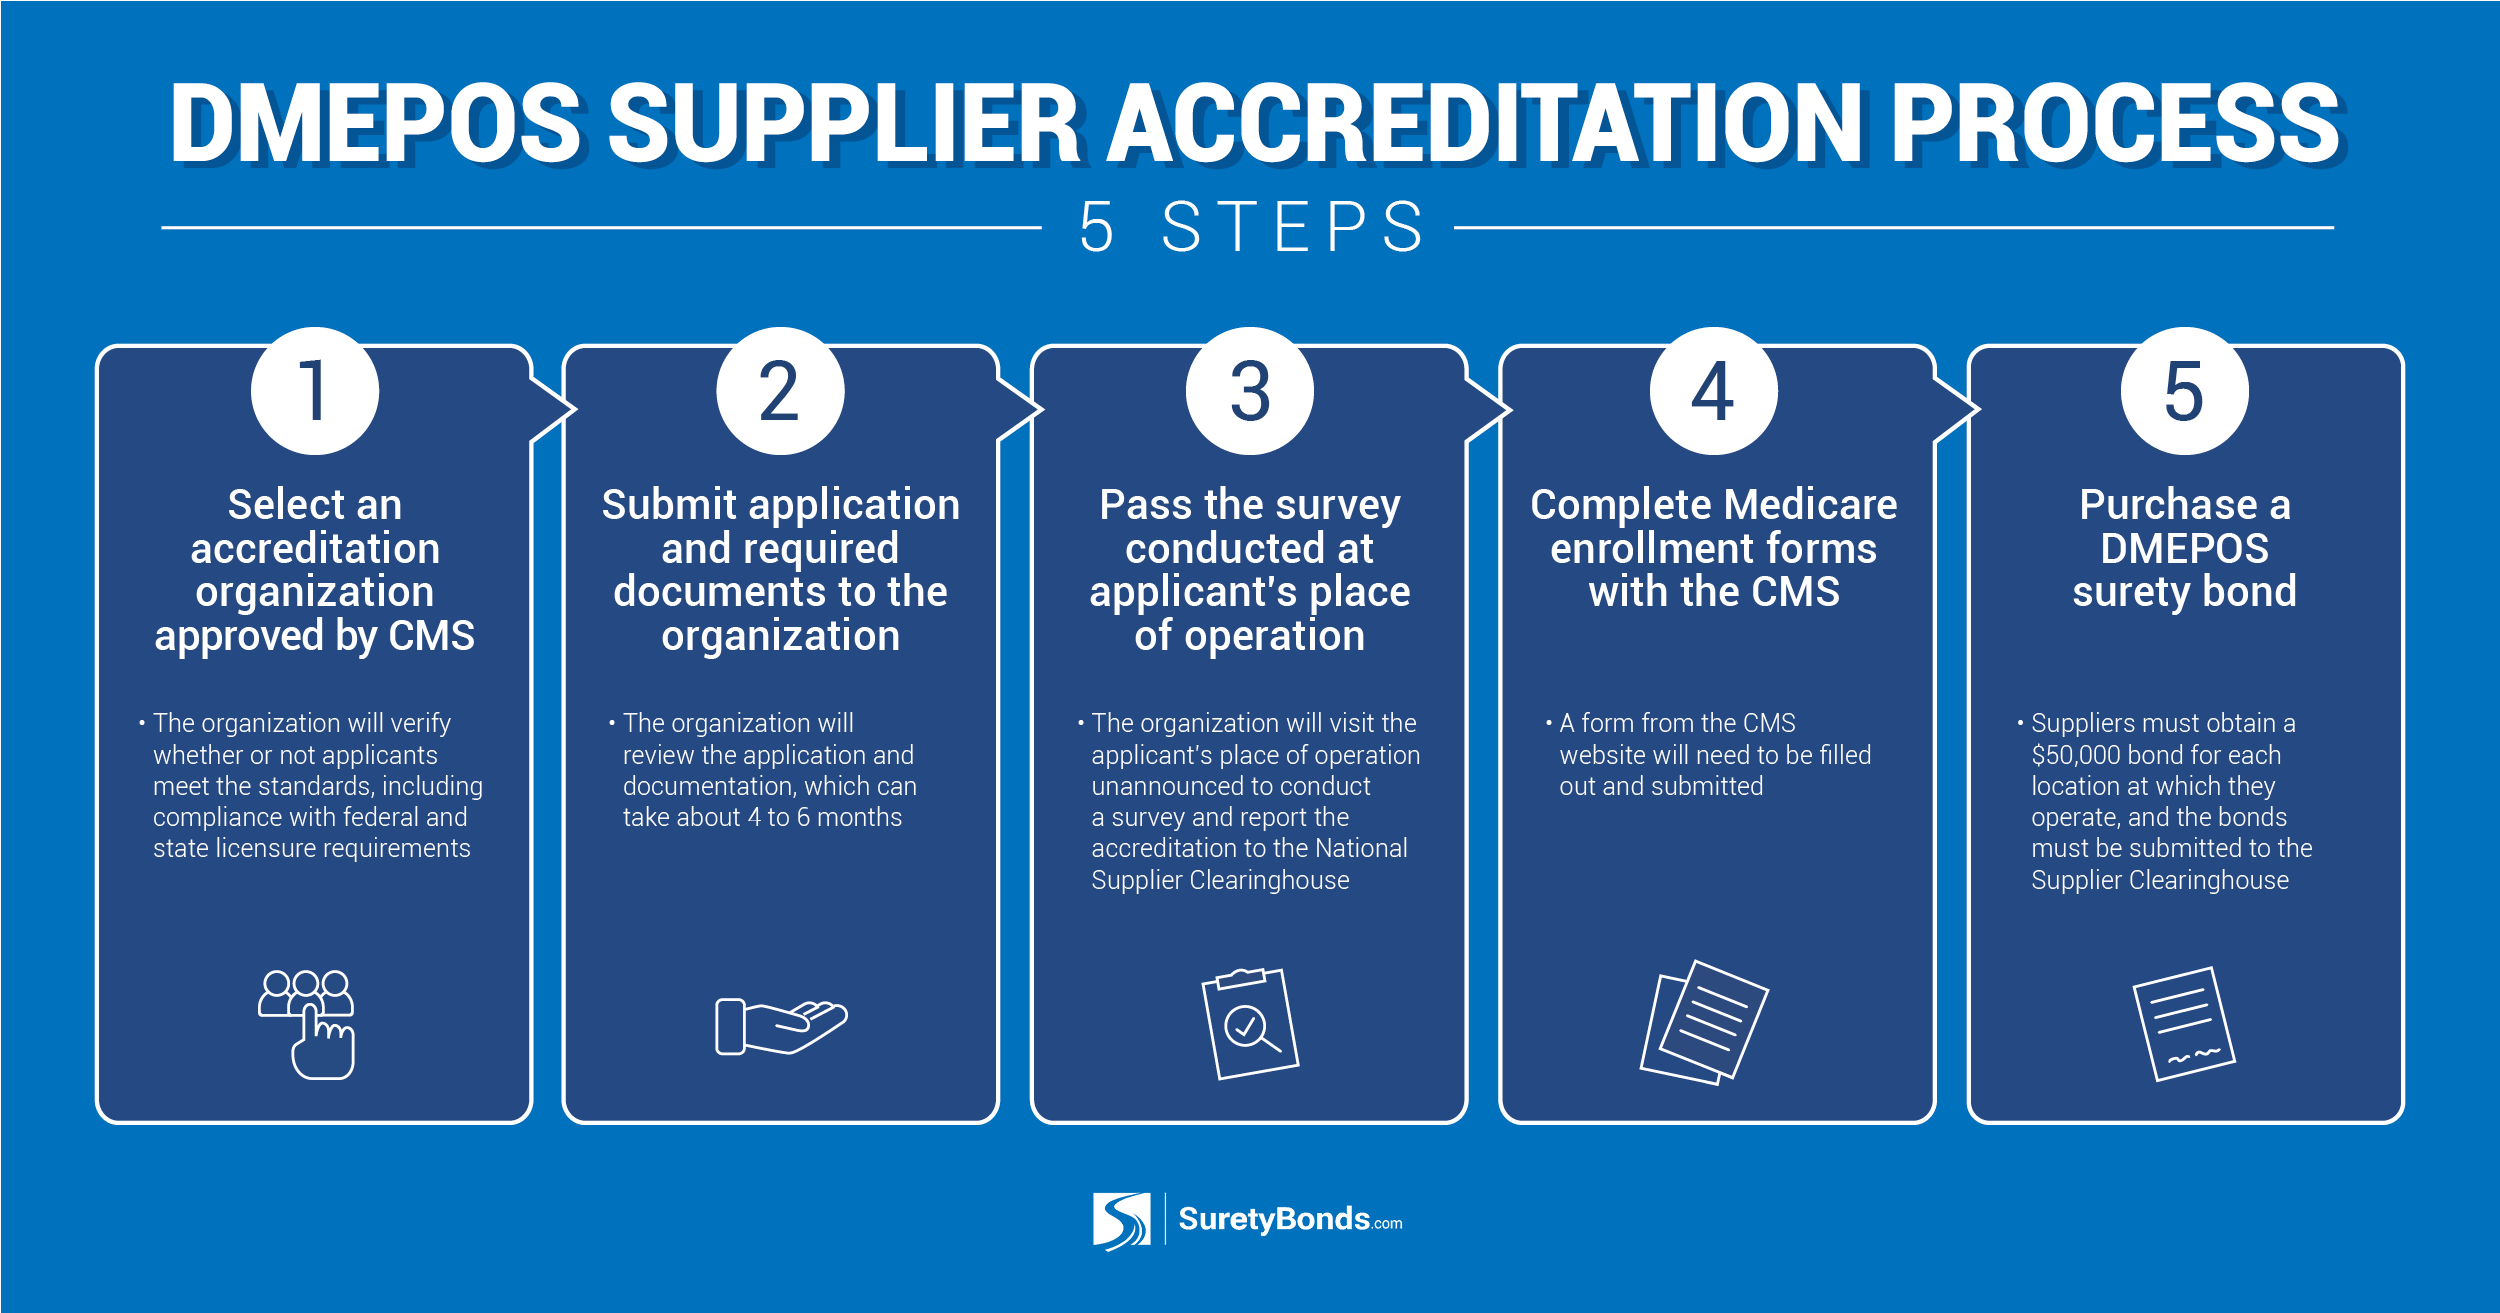 Select an accreditation organization, submit the required application and documentation, and post a DMEPOS bond.